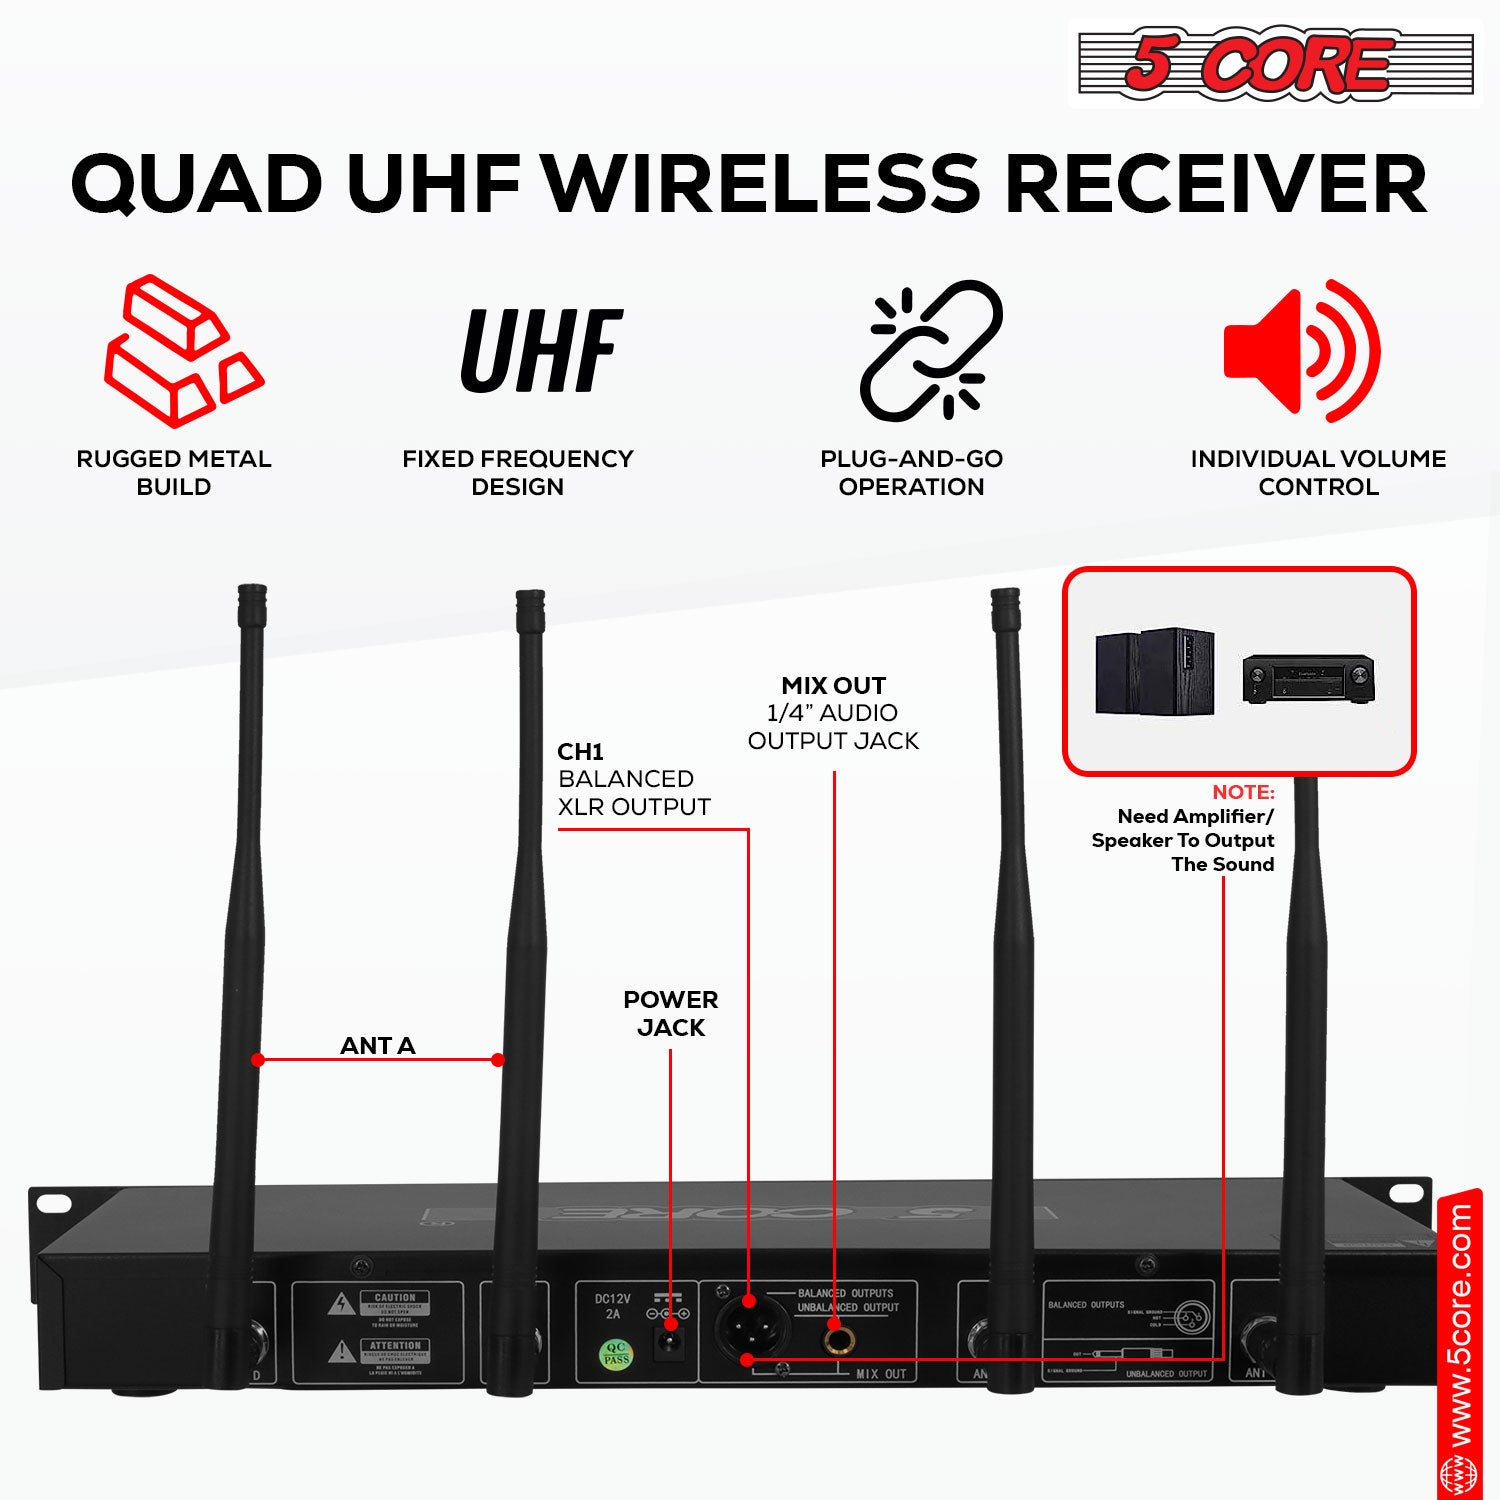 Extended Range Performance: Up to 492 Feet of Seamless Audio Connectivity with 5 Core's WM UHF 08-HM Wireless Microphone System.